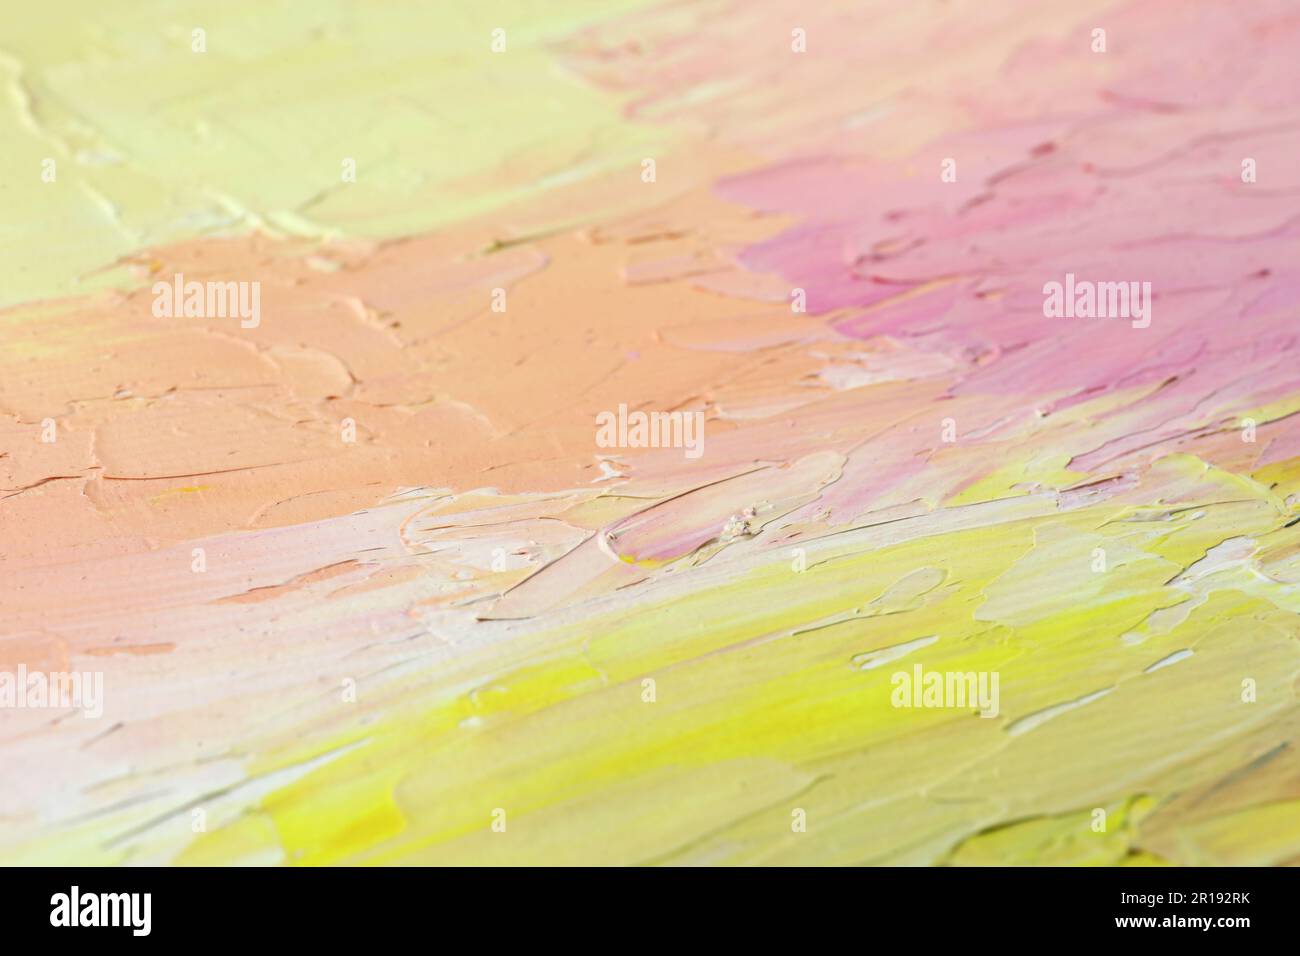 close up of abstract pastel paint brush stroke textured pattern Stock Photo  - Alamy